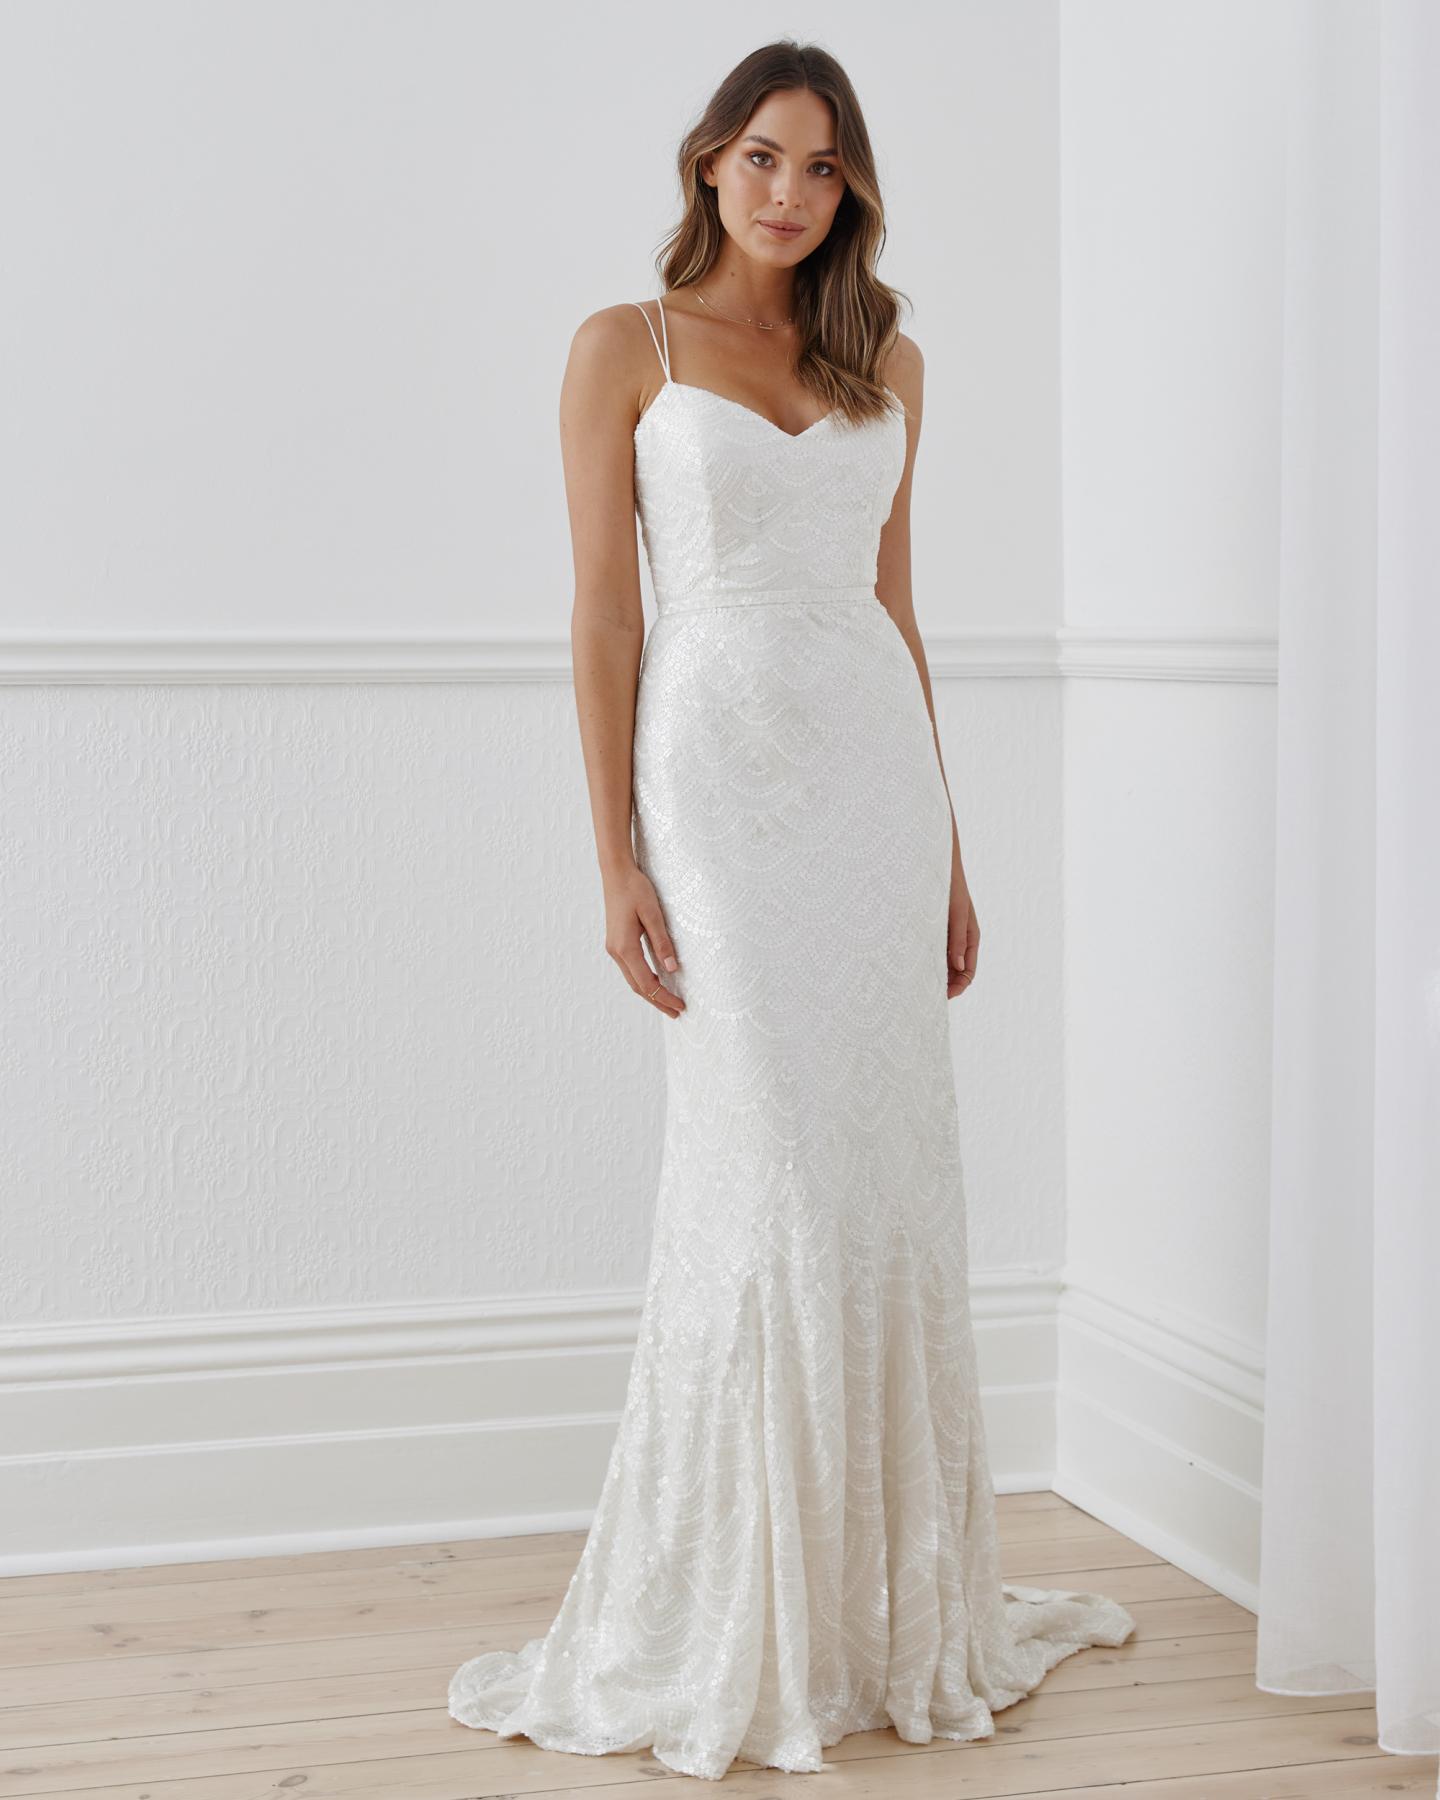 The Ellie gown by Karen Willis Holmes, a V-Neck open back, beaded fit and flare wedding dress with spaghetti straps.